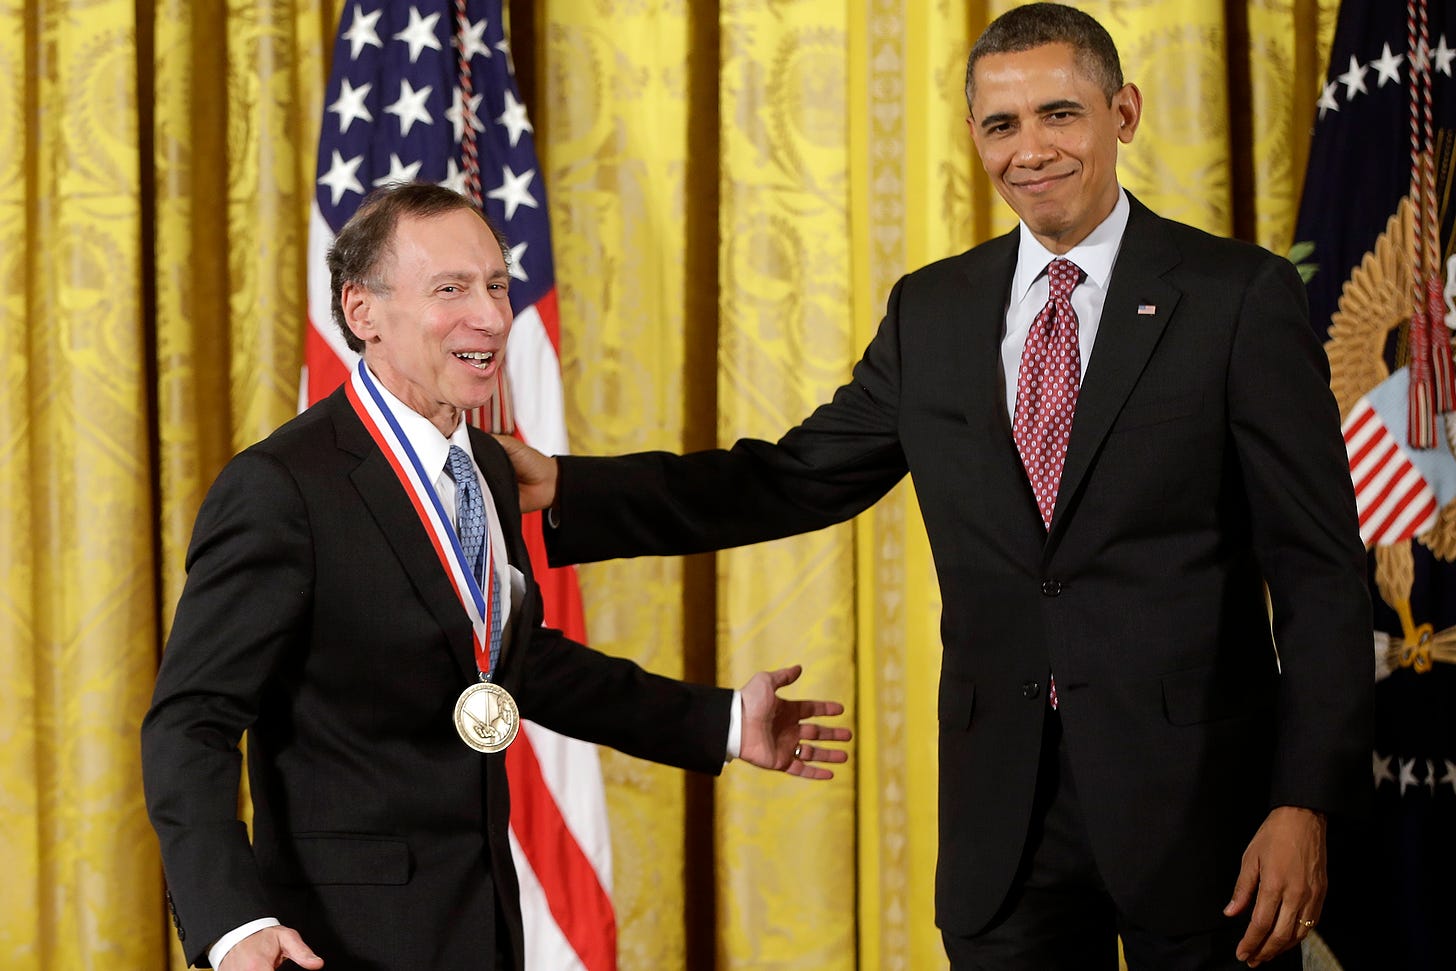 President Barack Obama awards the National Medal of Technology and Innovation to Dr. Robert Langer of the Massachusetts Institute of Technology, Friday, Feb. 1, 2013, during a ceremony in the East Room of the White House in Washington. The awards are the highest honors bestowed by the United States Government upon scientists, engineers, and inventors. (AP Photo/Charles Dharapak)